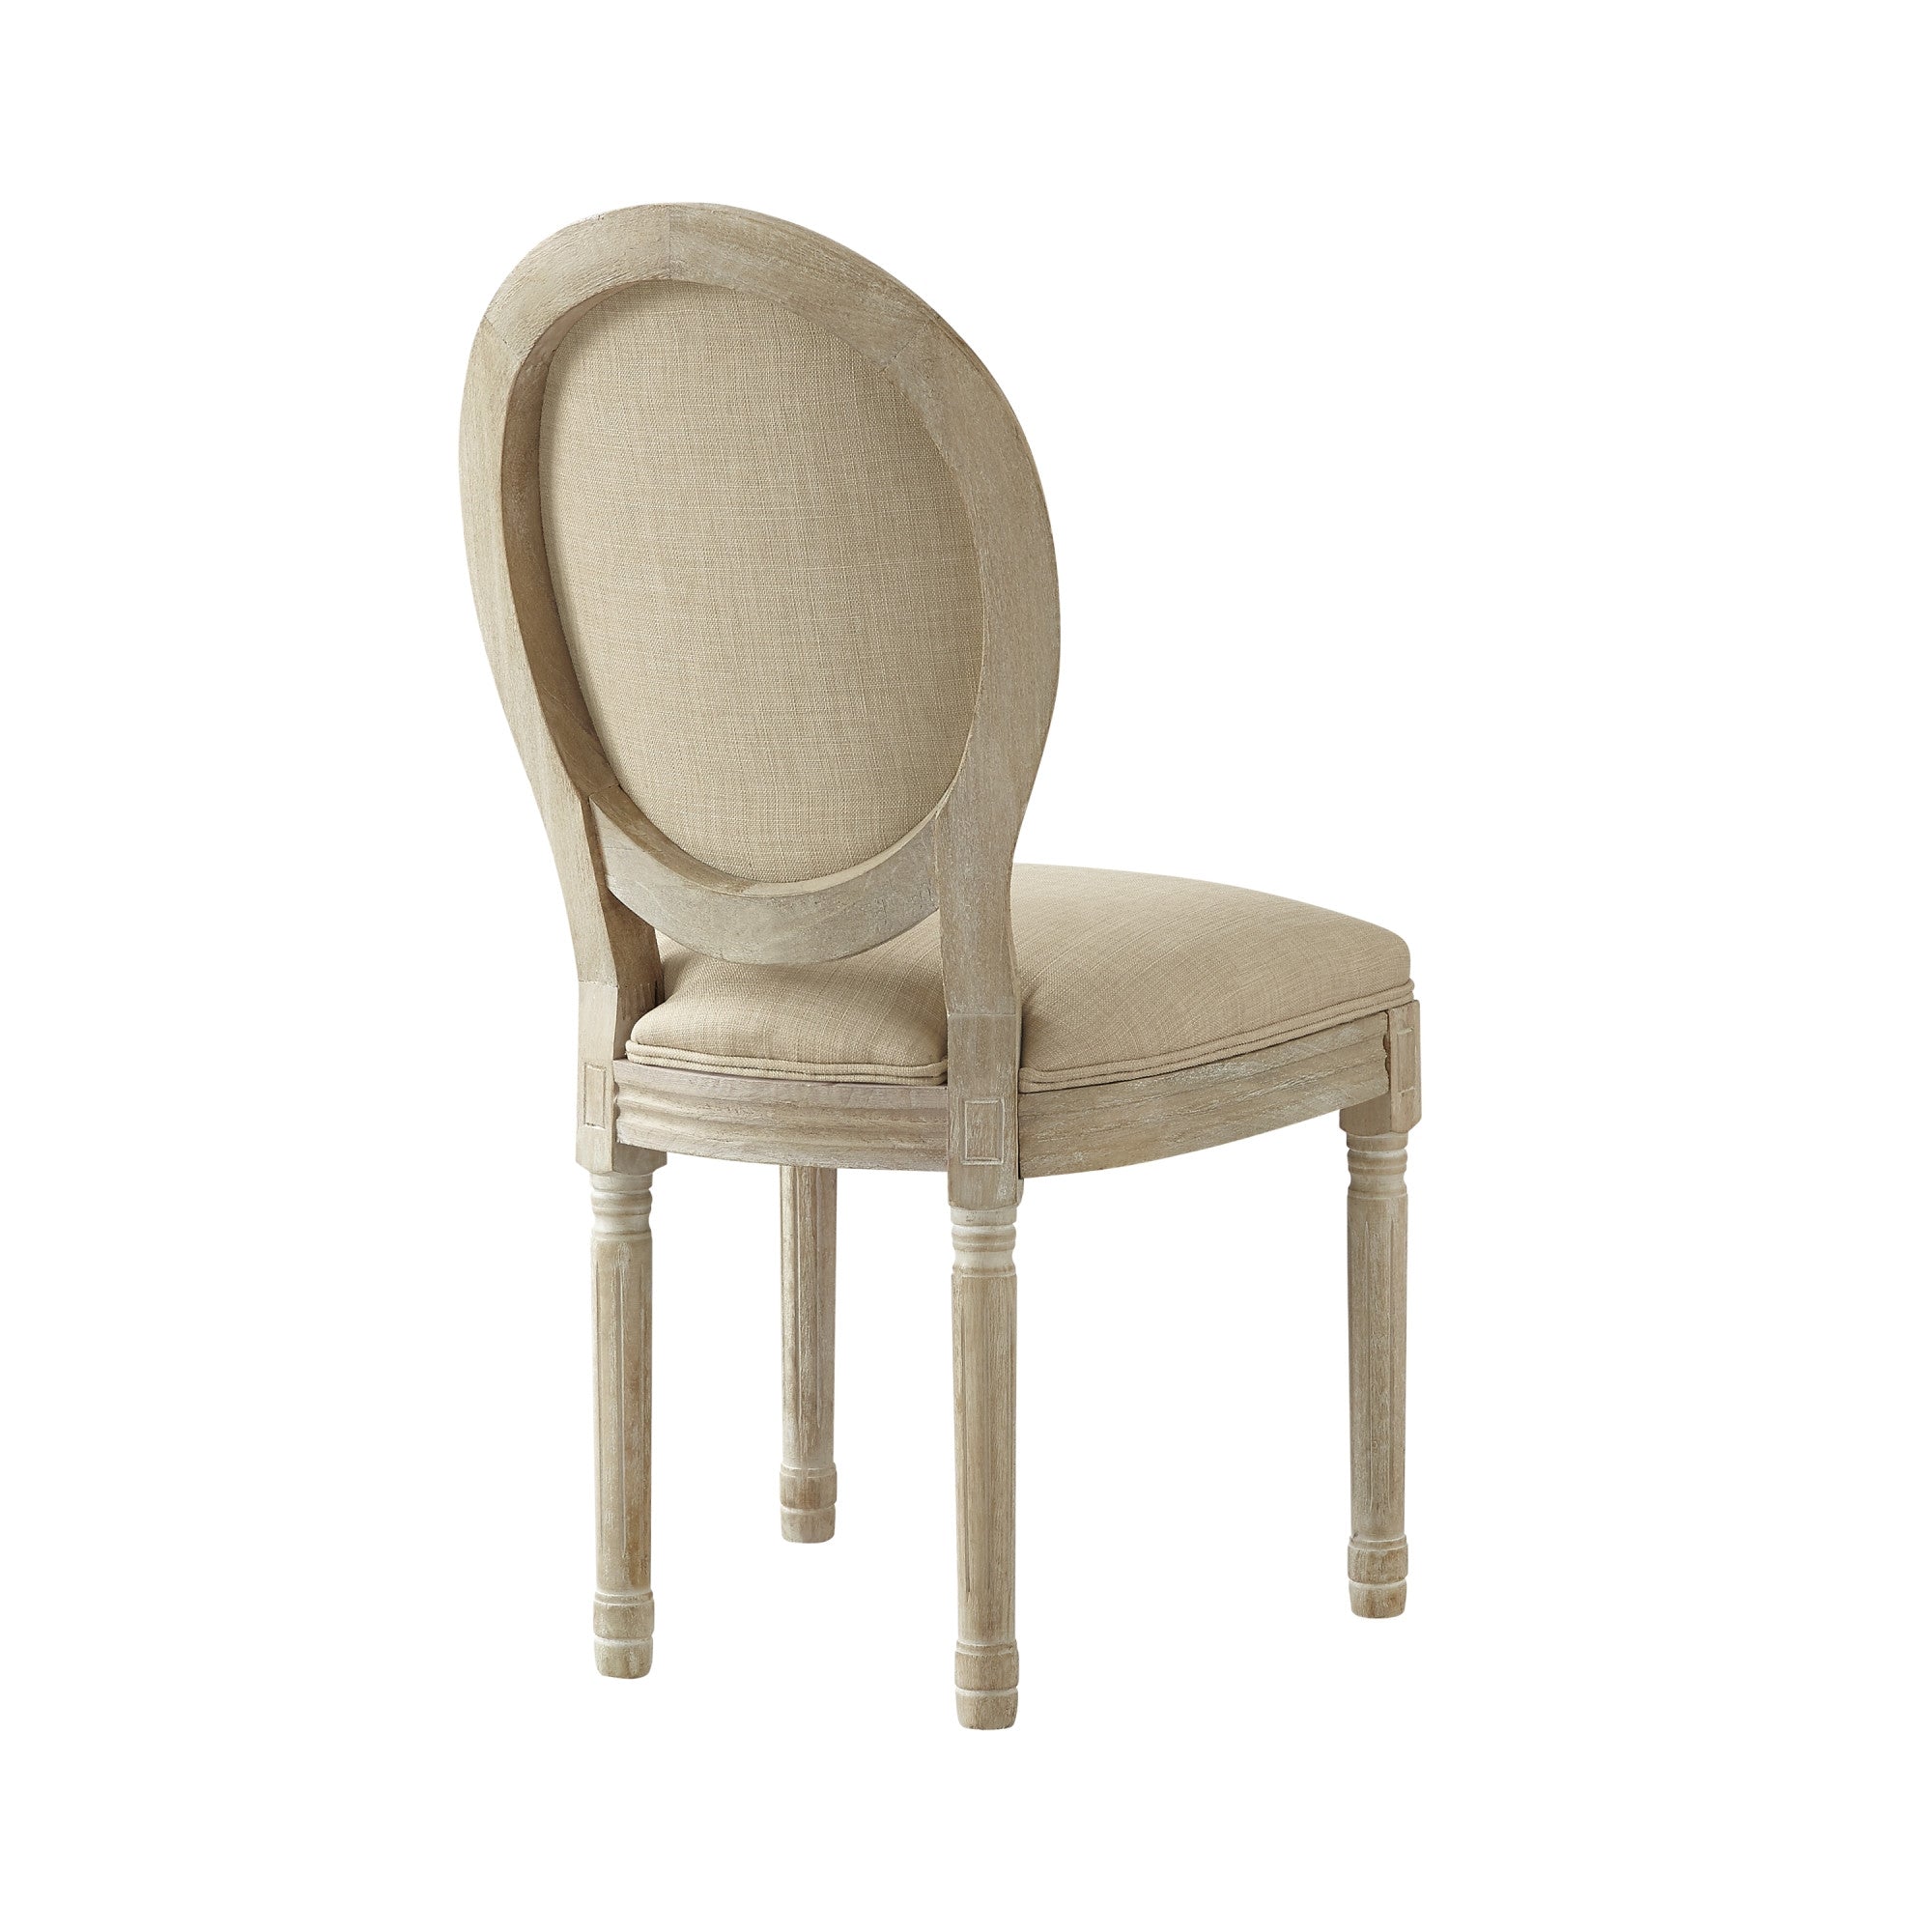 Tufted Beige and Brown Upholstered Linen Dining Side Chair